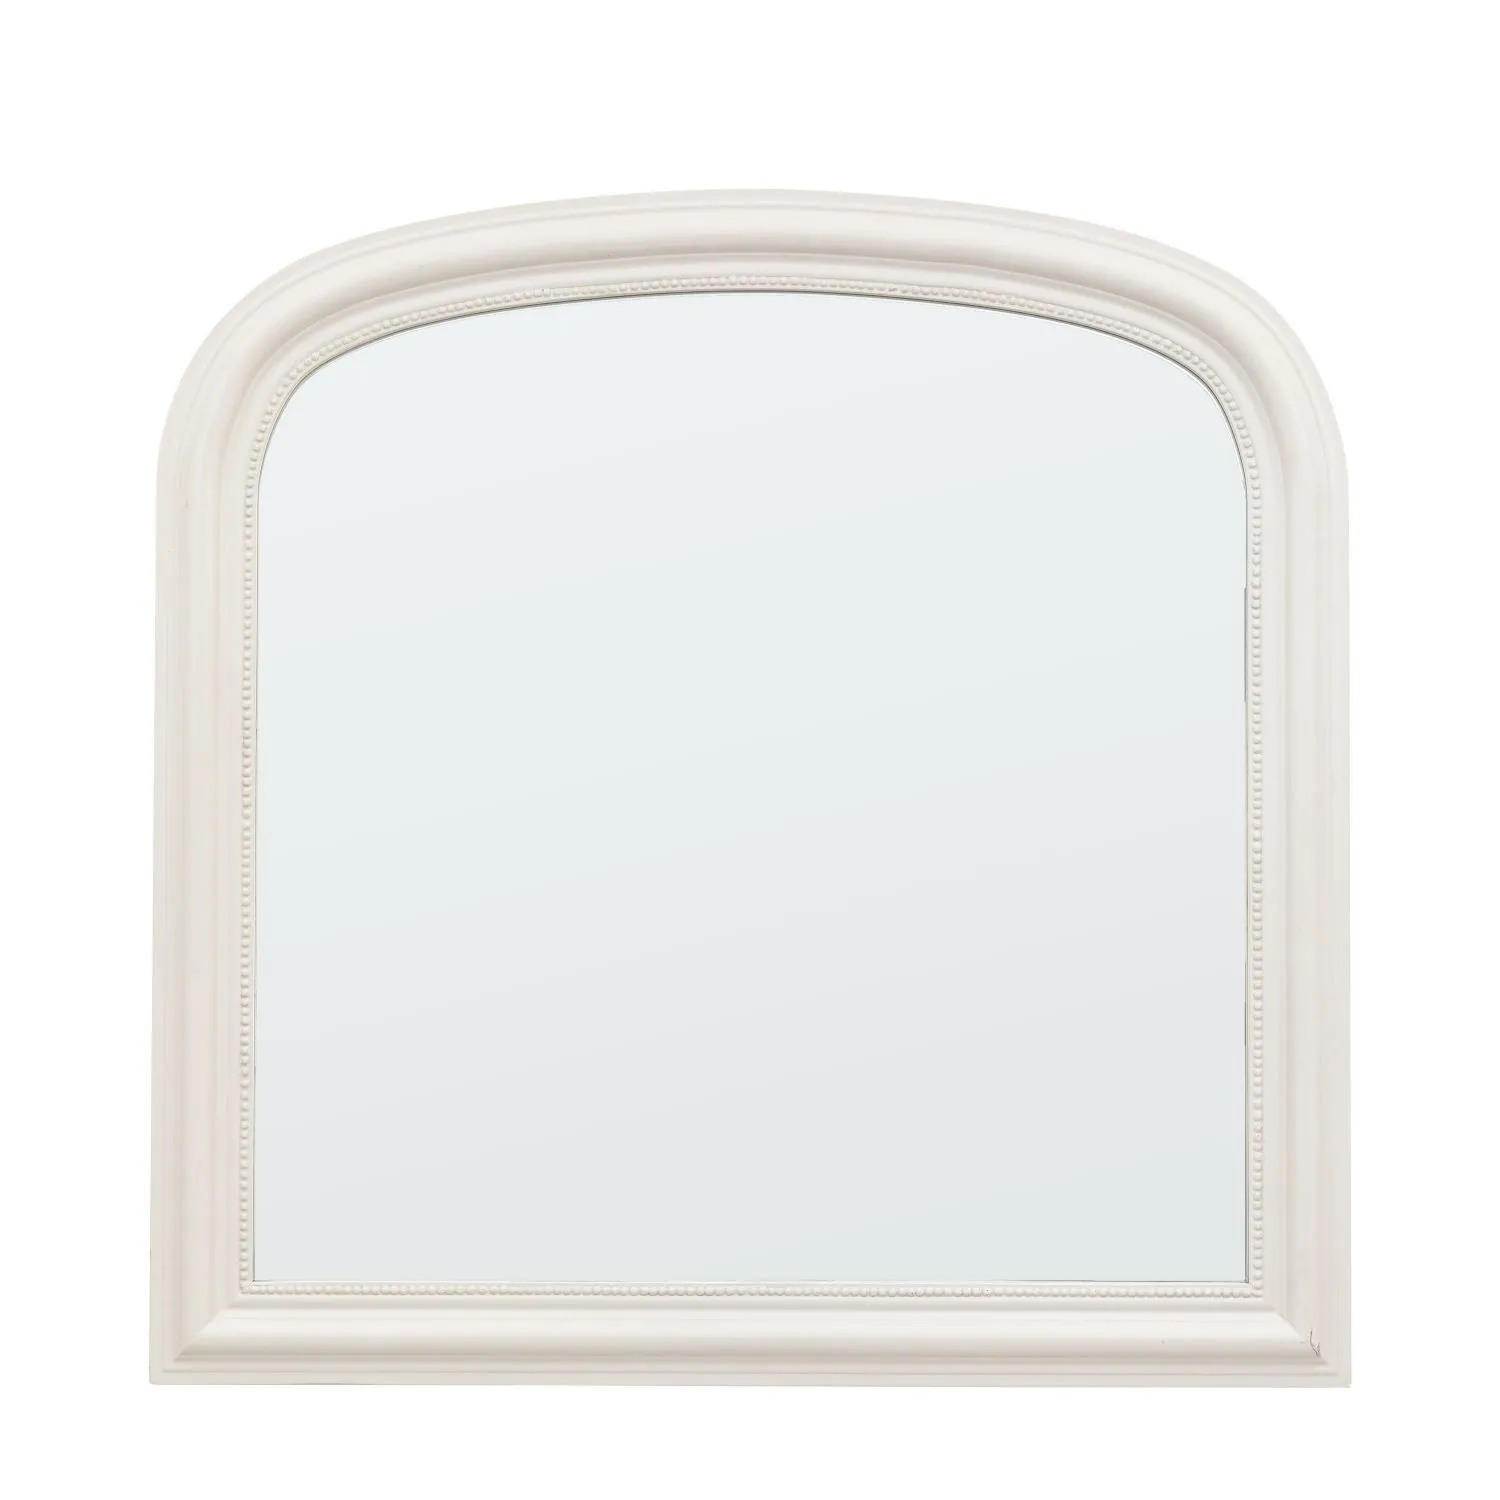 Glass Size mm W760 x H760 Overmantle Mirror Stone